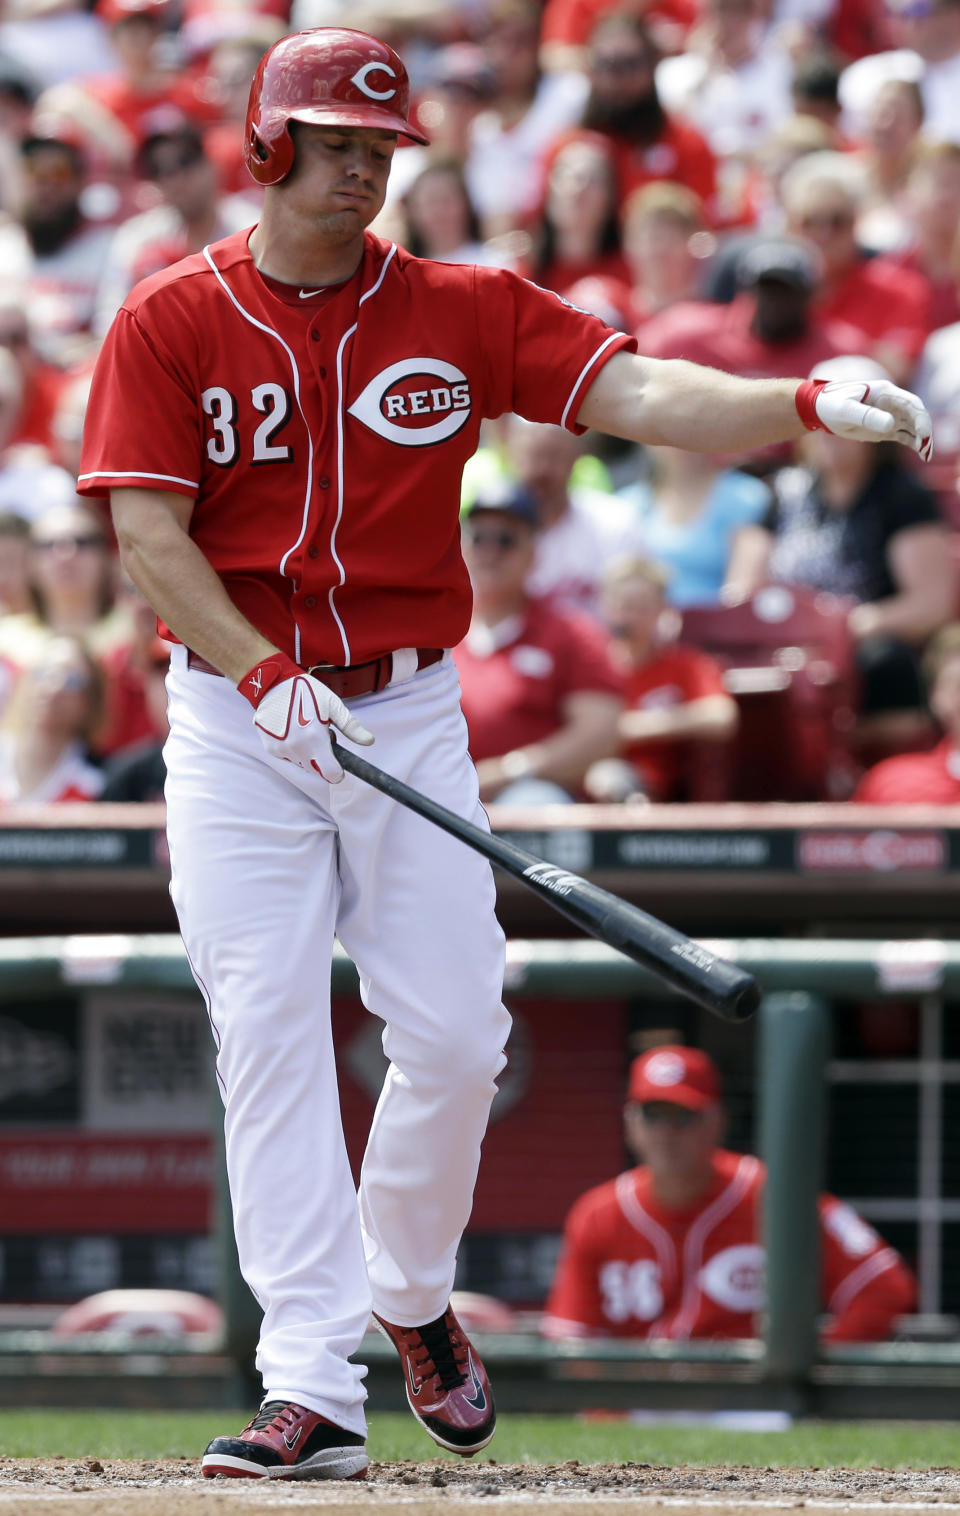 Cincinnati Reds' Jay Bruce strikes out against Tampa Bay Rays starting pitcher Alex Cobb to end the fourth inning of a baseball game, Saturday, April 12, 2014, in Cincinnati. (AP Photo/Al Behrman)